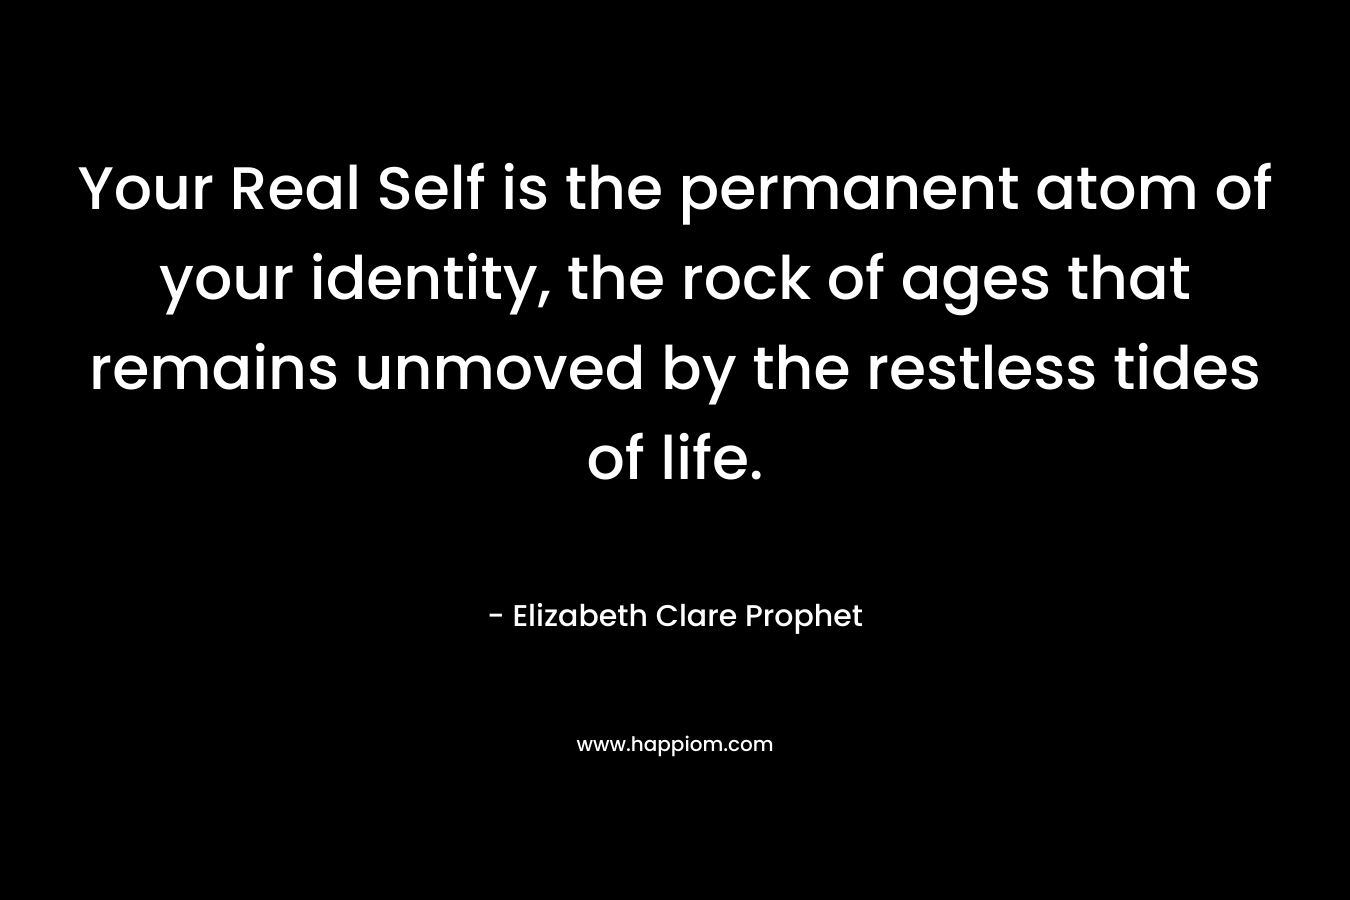 Your Real Self is the permanent atom of your identity, the rock of ages that remains unmoved by the restless tides of life. – Elizabeth Clare Prophet